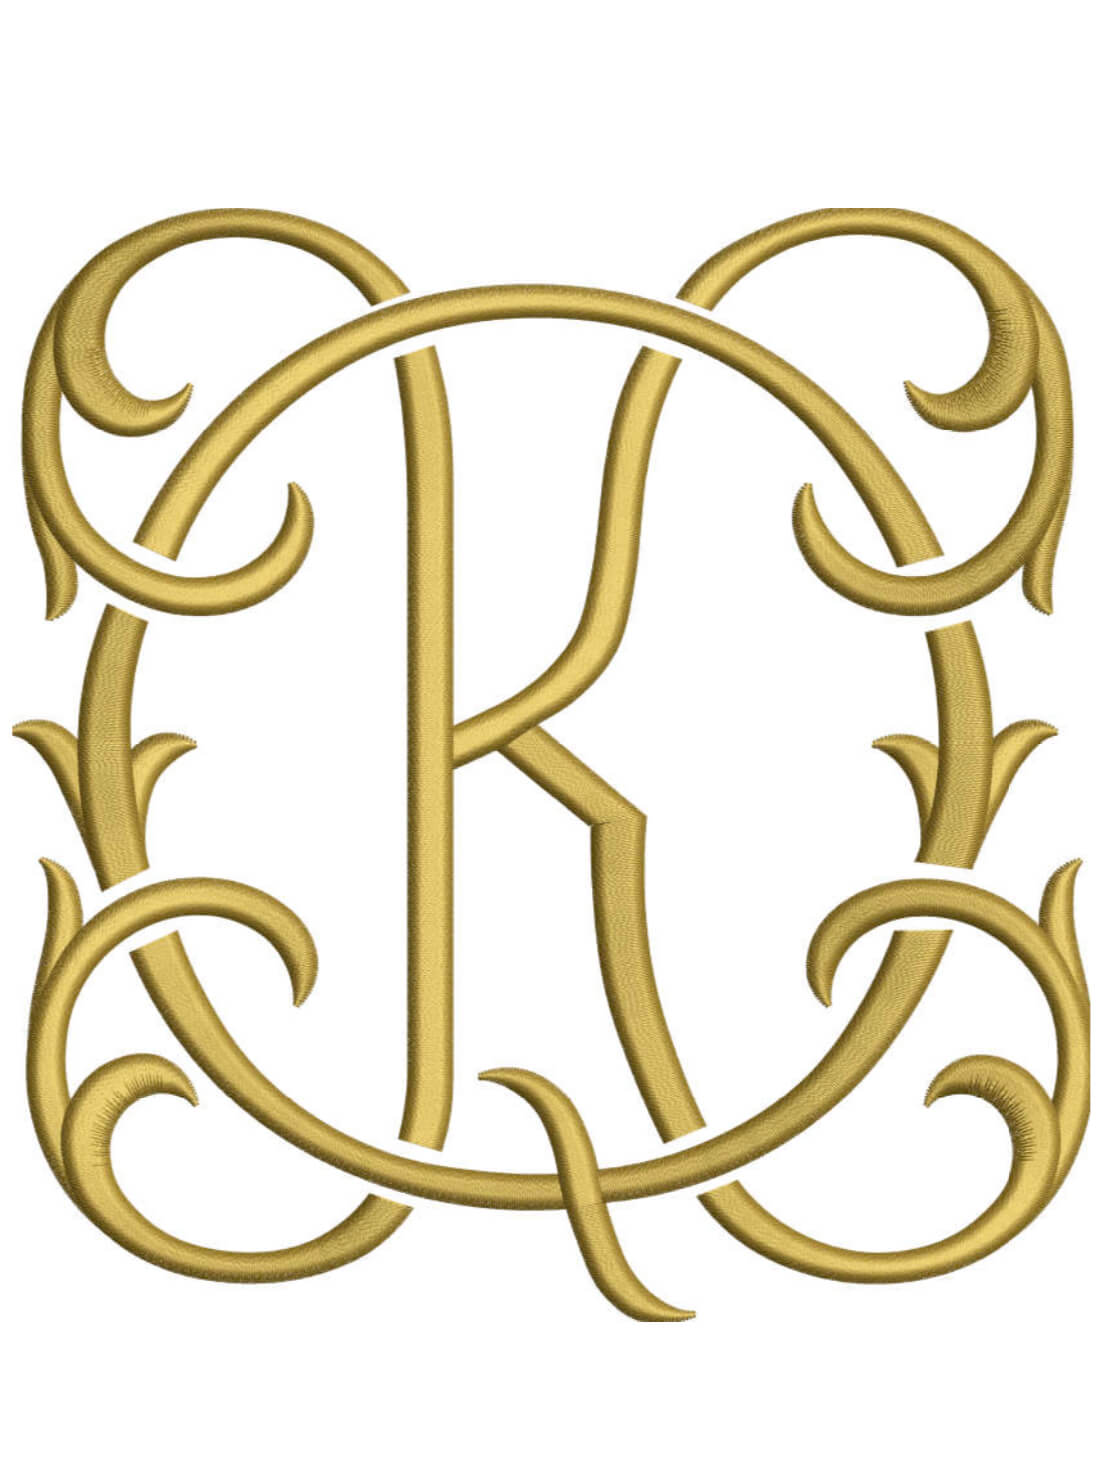 Monogram Couture KQ for Embroidery